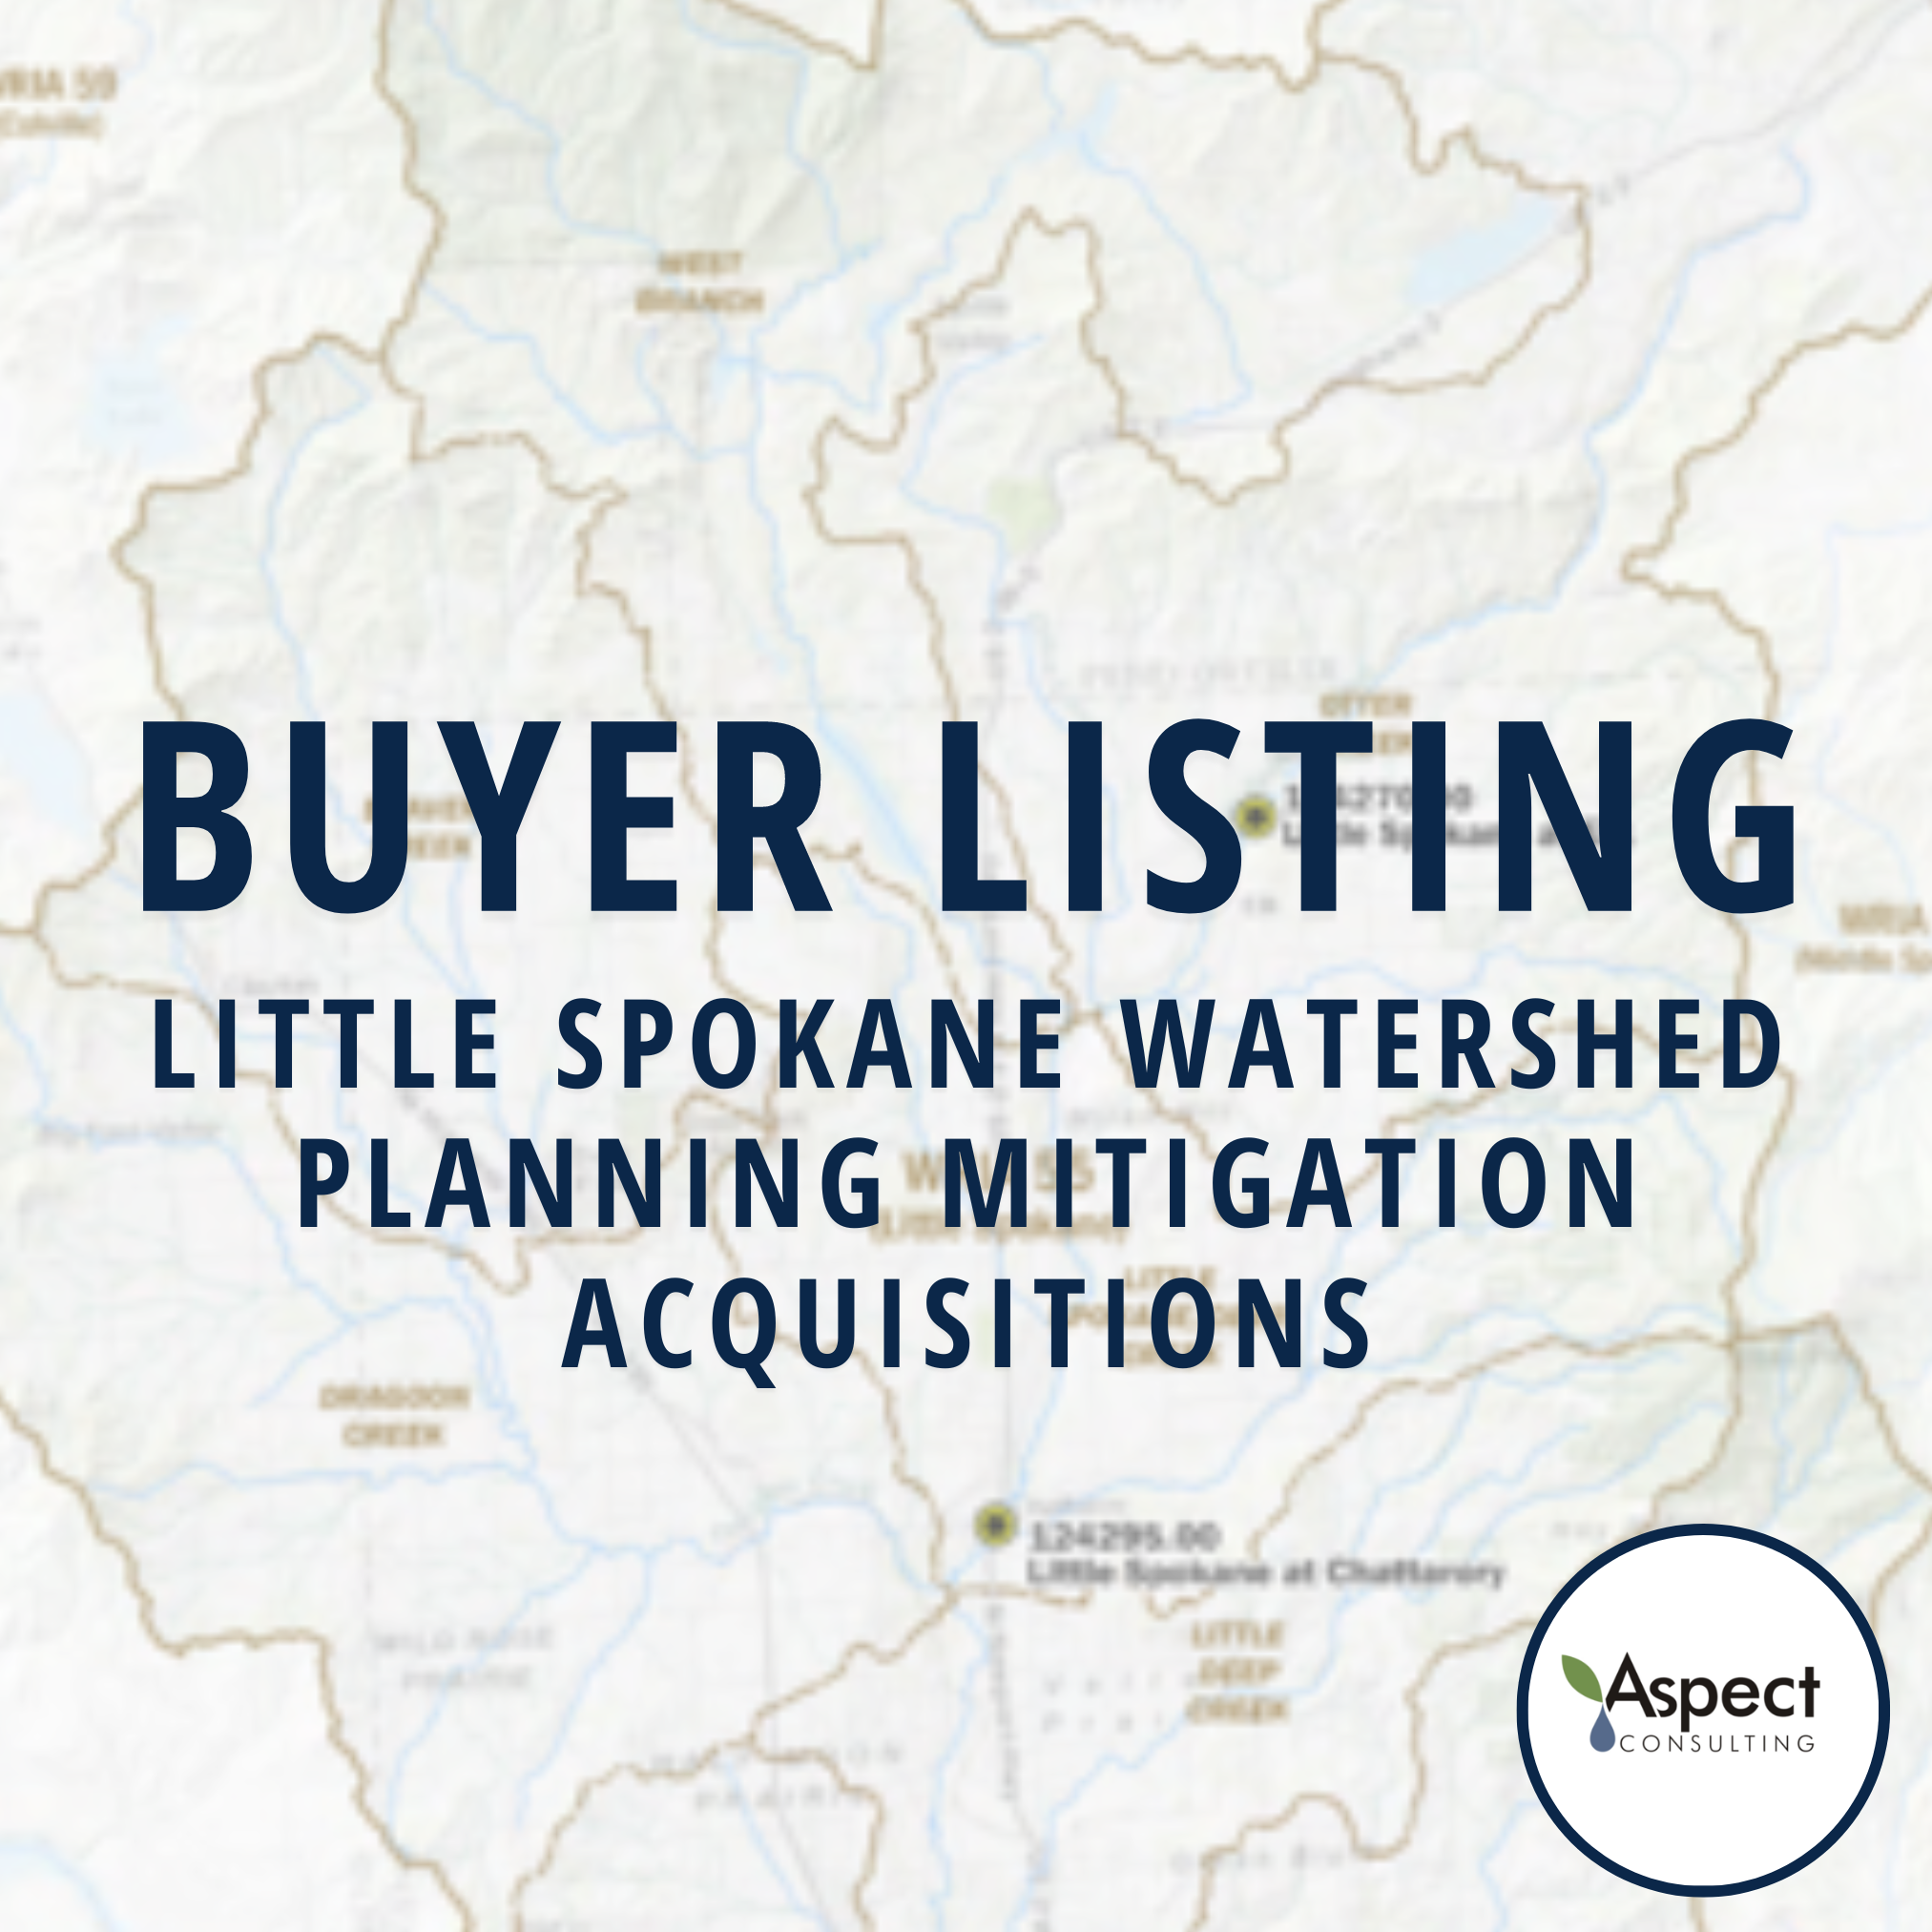 Little Spokane Watershed Planning Mitigation Acquisitions - Aspect Consulting